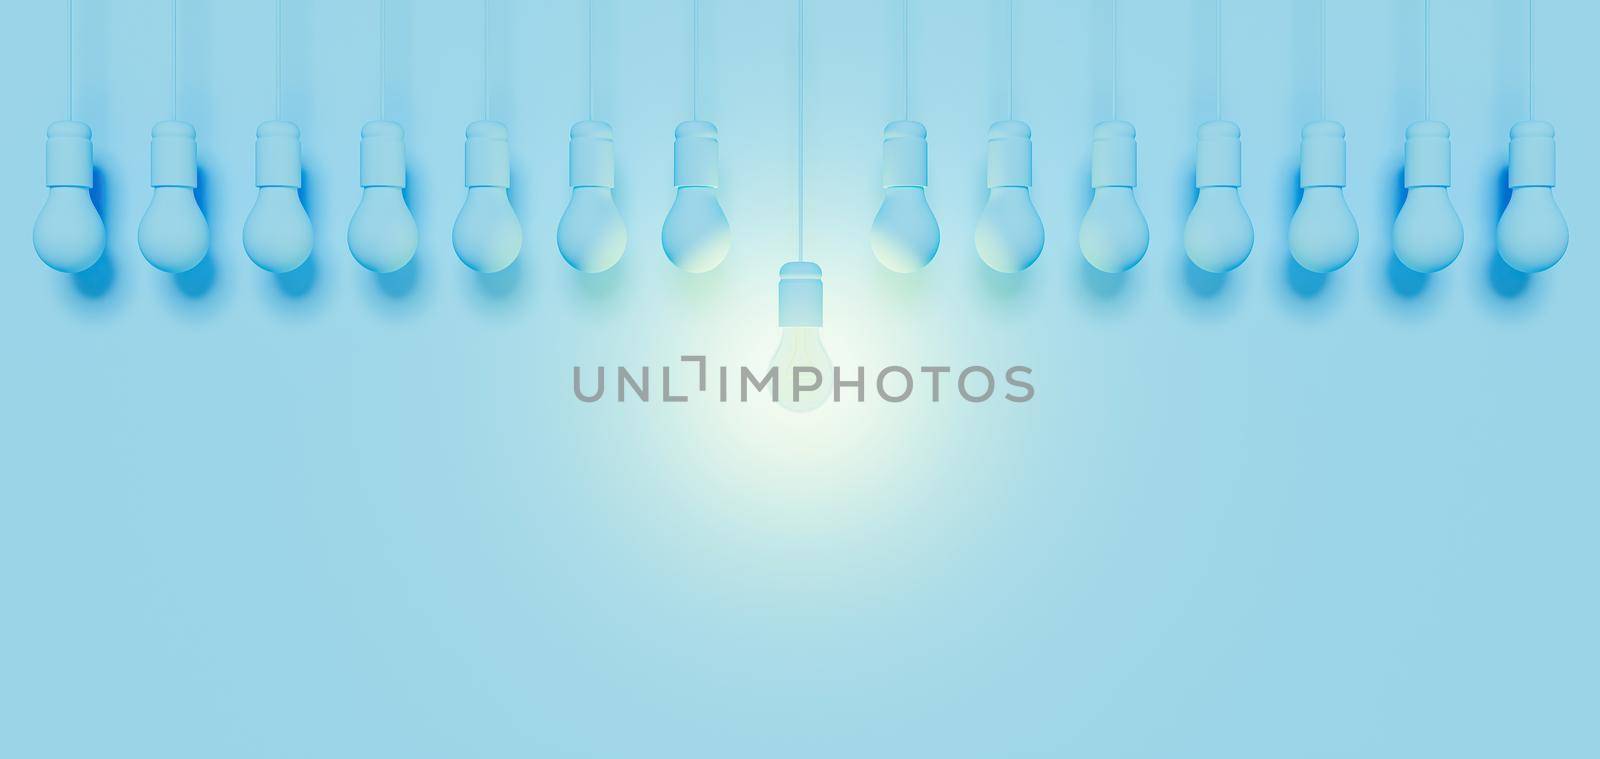 monochromatic banner with a line of blue bulbs by asolano